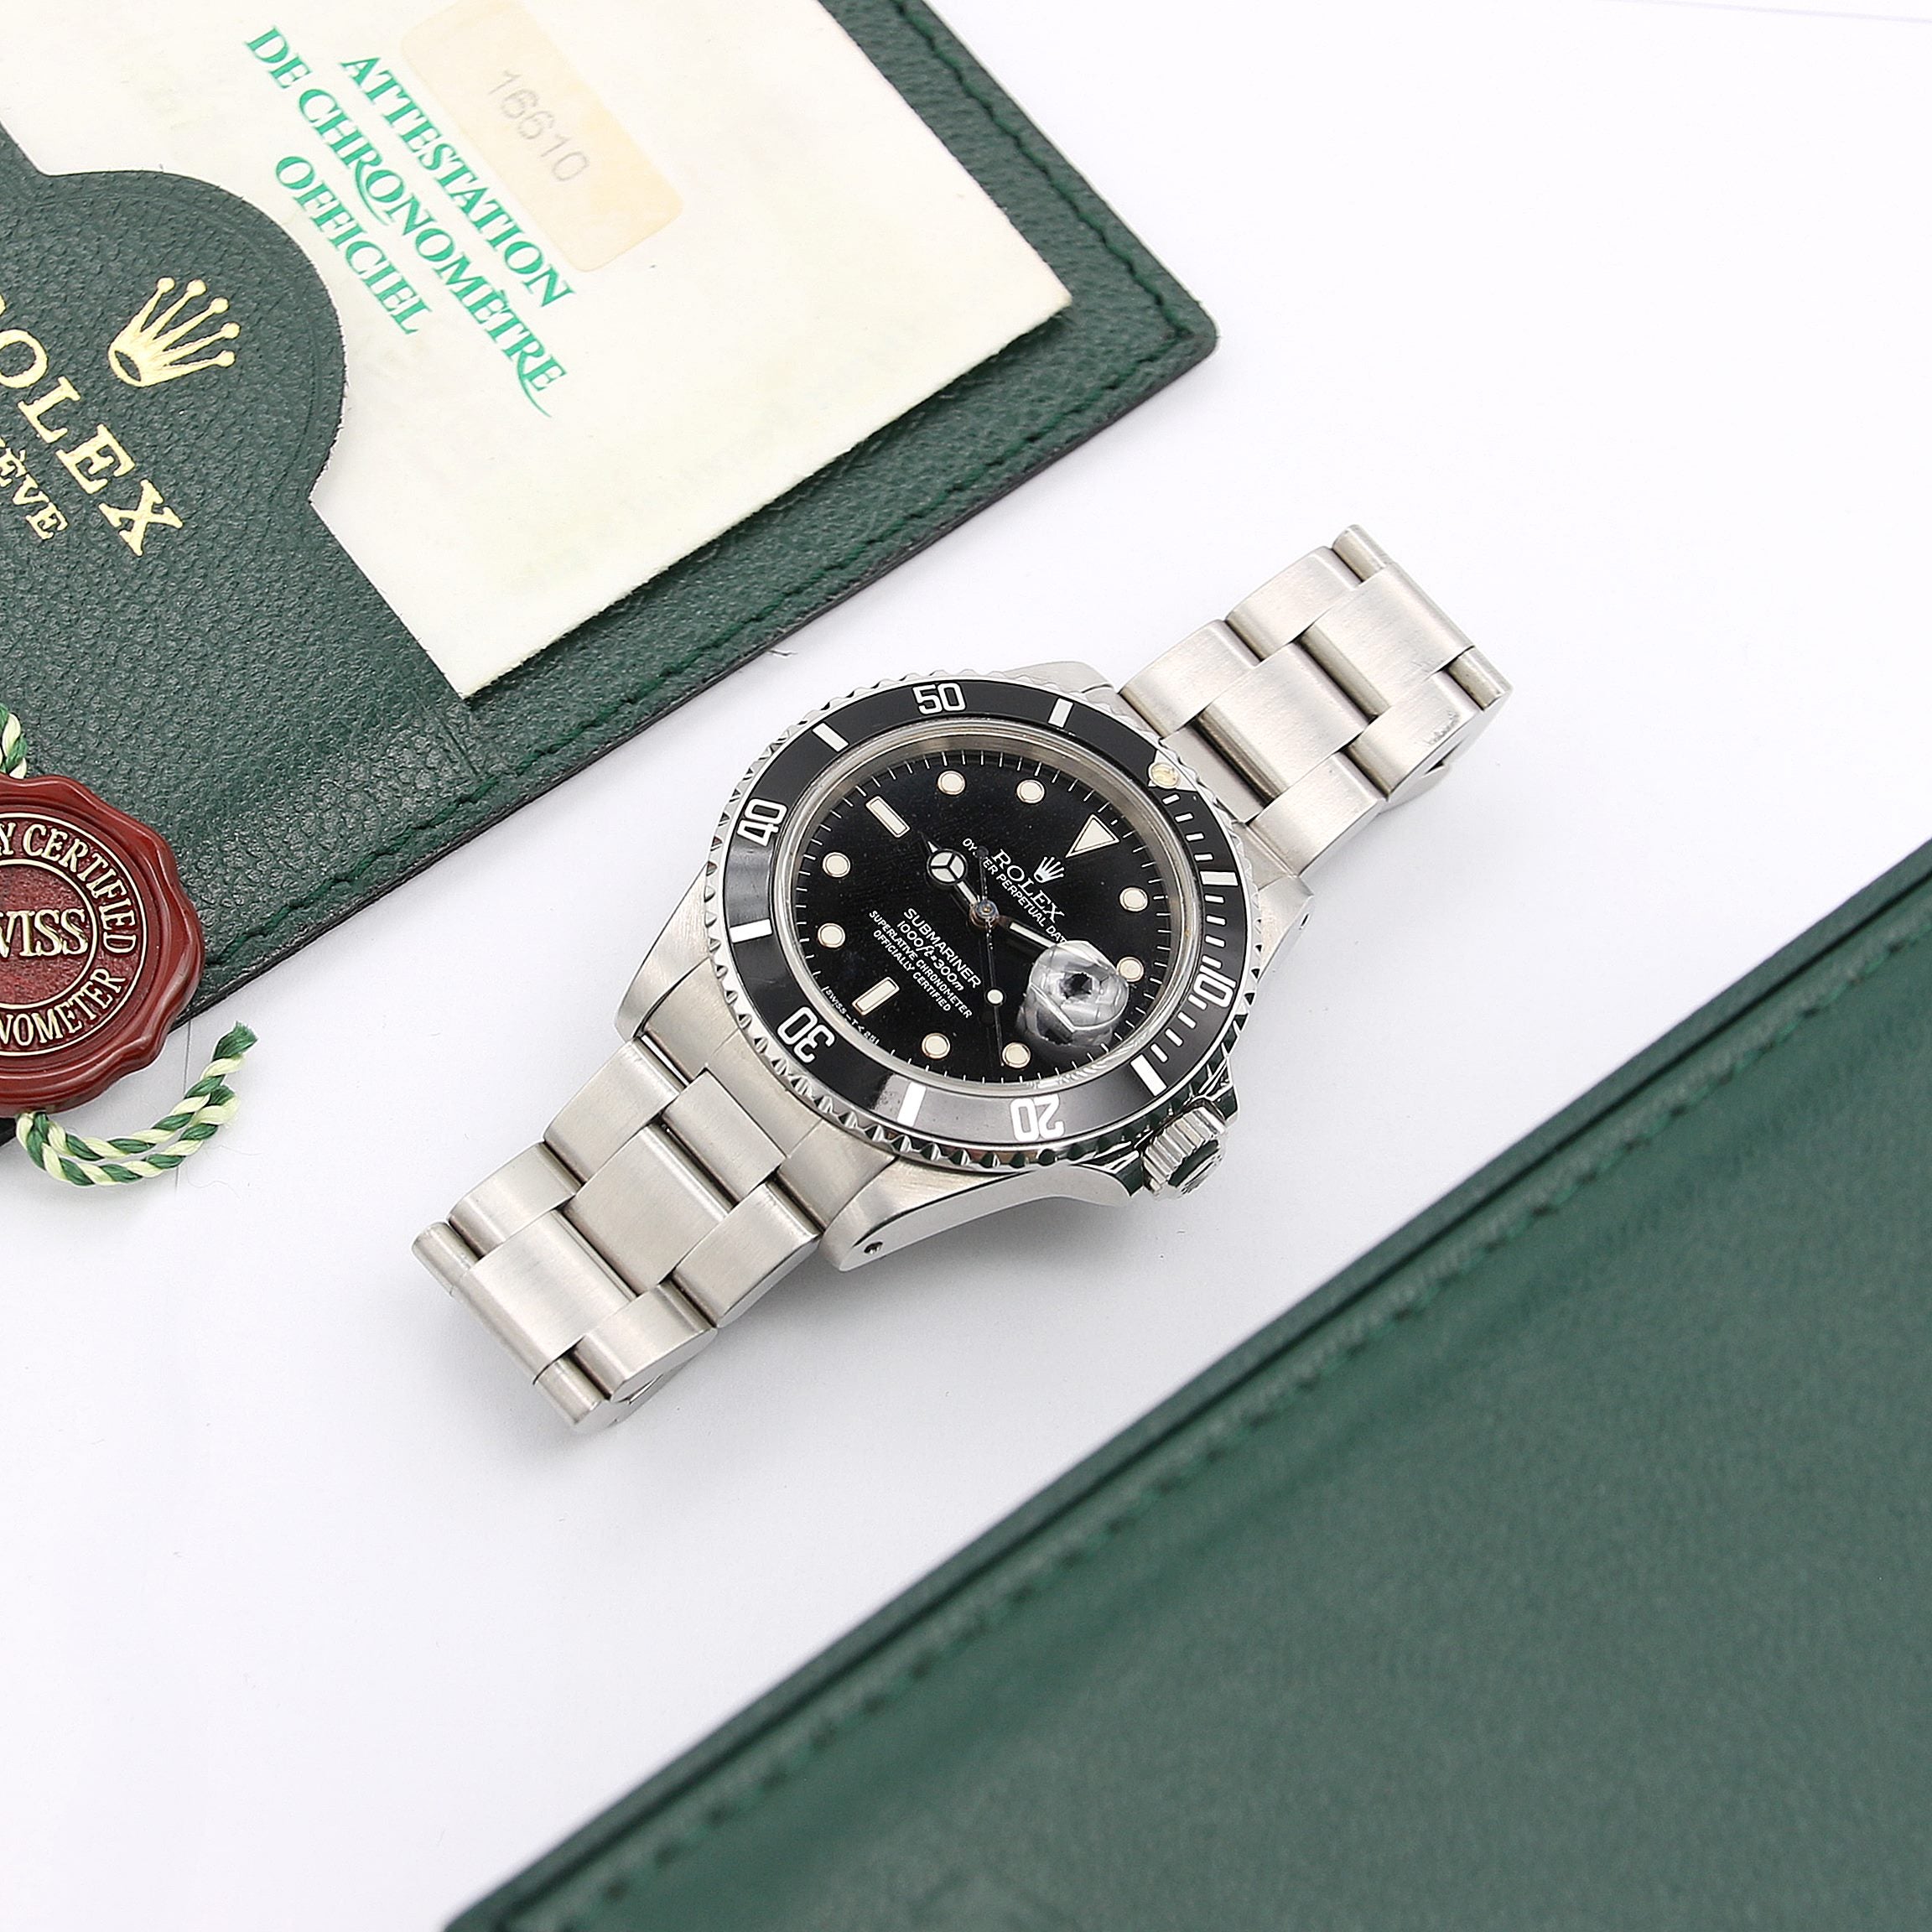 How To Adjust The Clasp On Your Rolex Submariner 16610 - 116610 & Rolex  DeepSea Seadweller 116660 - YouTube